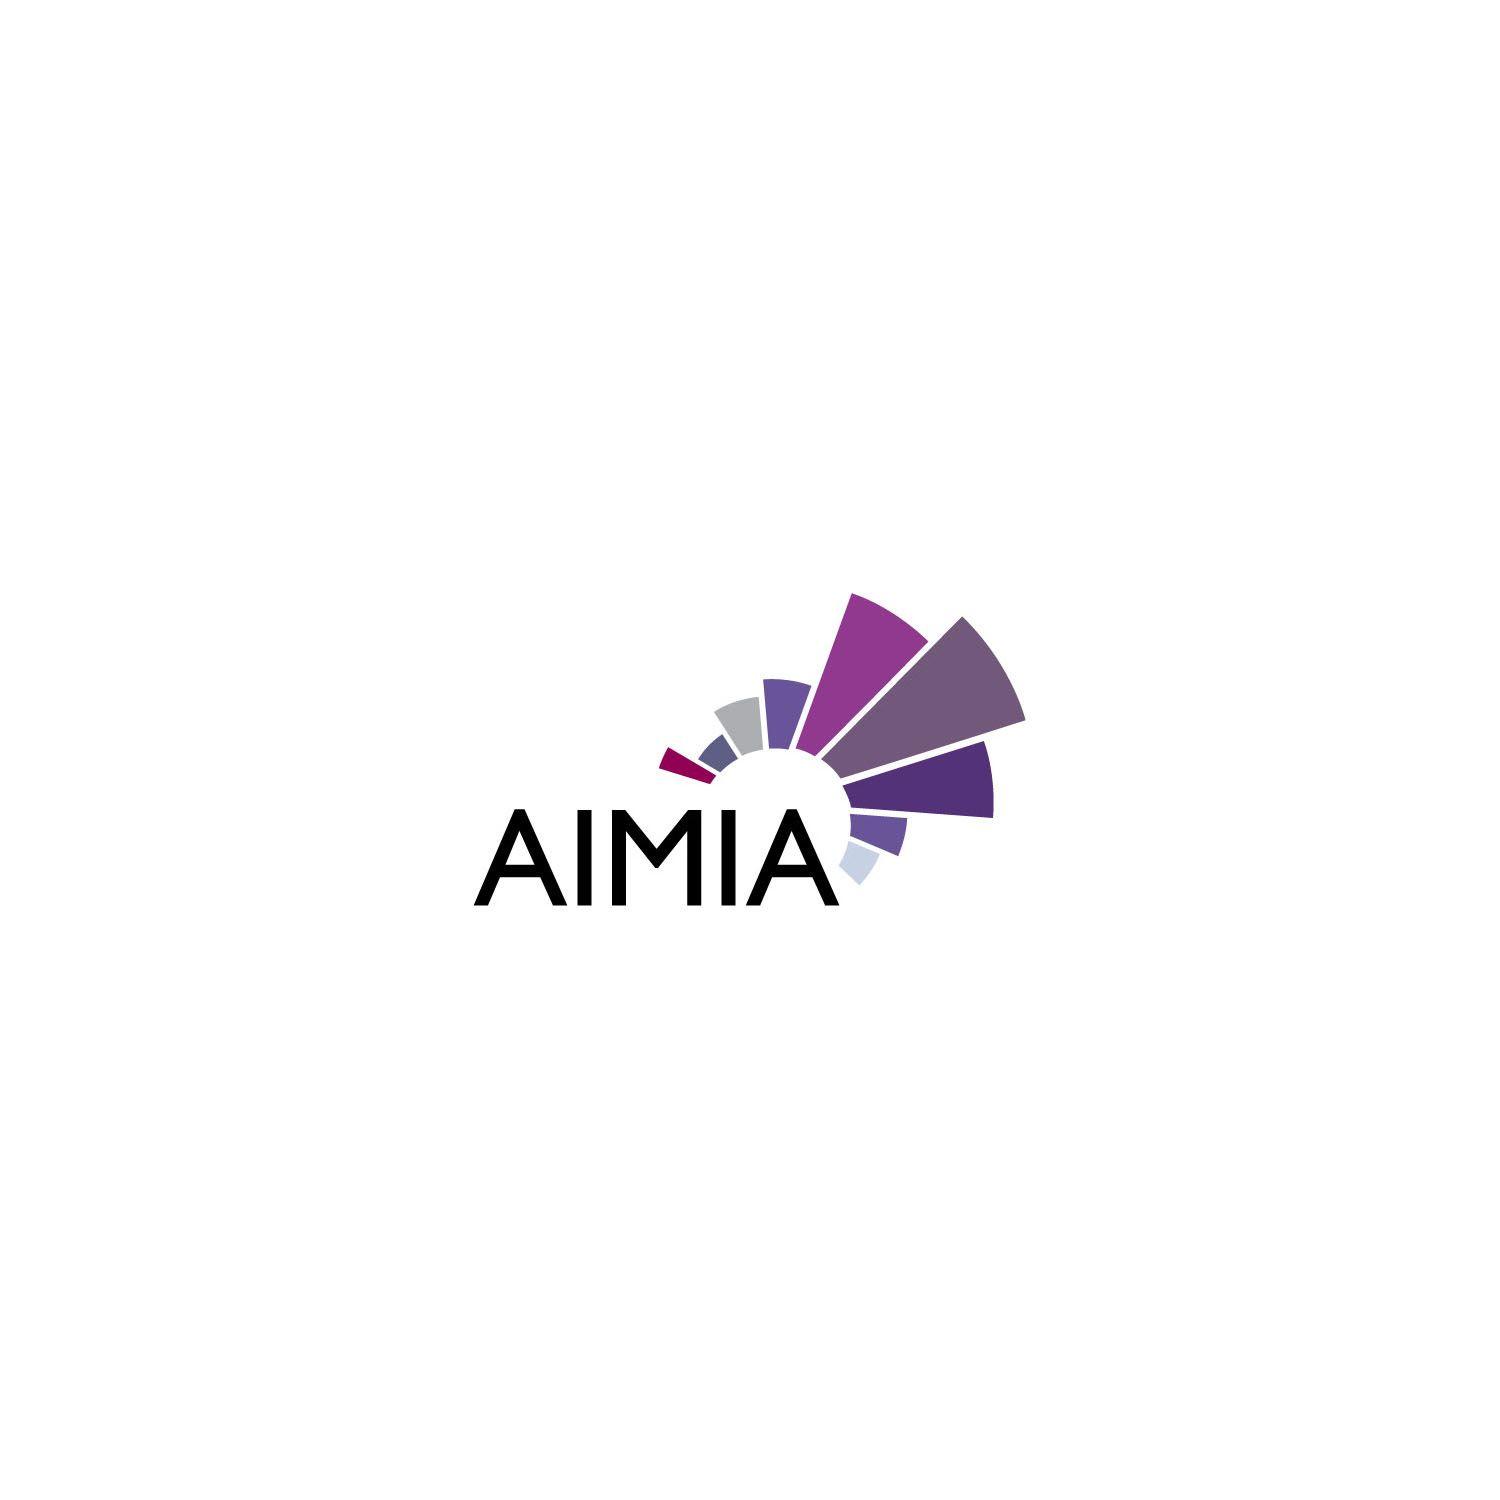 Aimia Logo - AIMIA encourages and supports the digital industry and acts as a ...